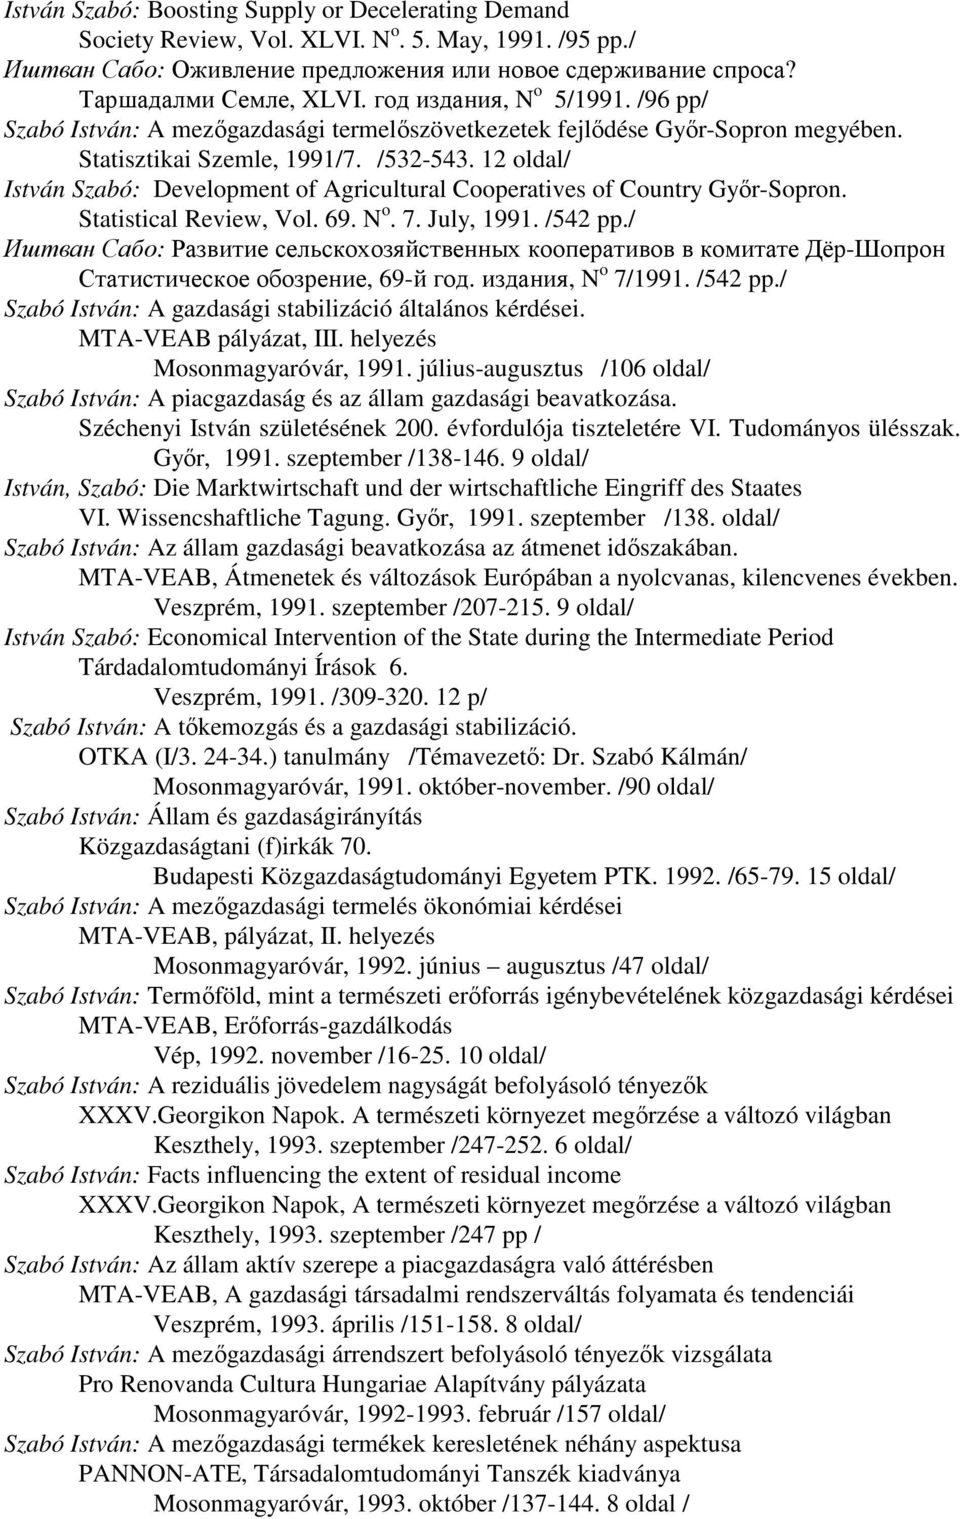 12 oldal/ István Szabó: Development of Agricultural Cooperatives of Country Gyır-Sopron. Statistical Review, Vol. 69. N o. 7. July, 1991. /542 pp.